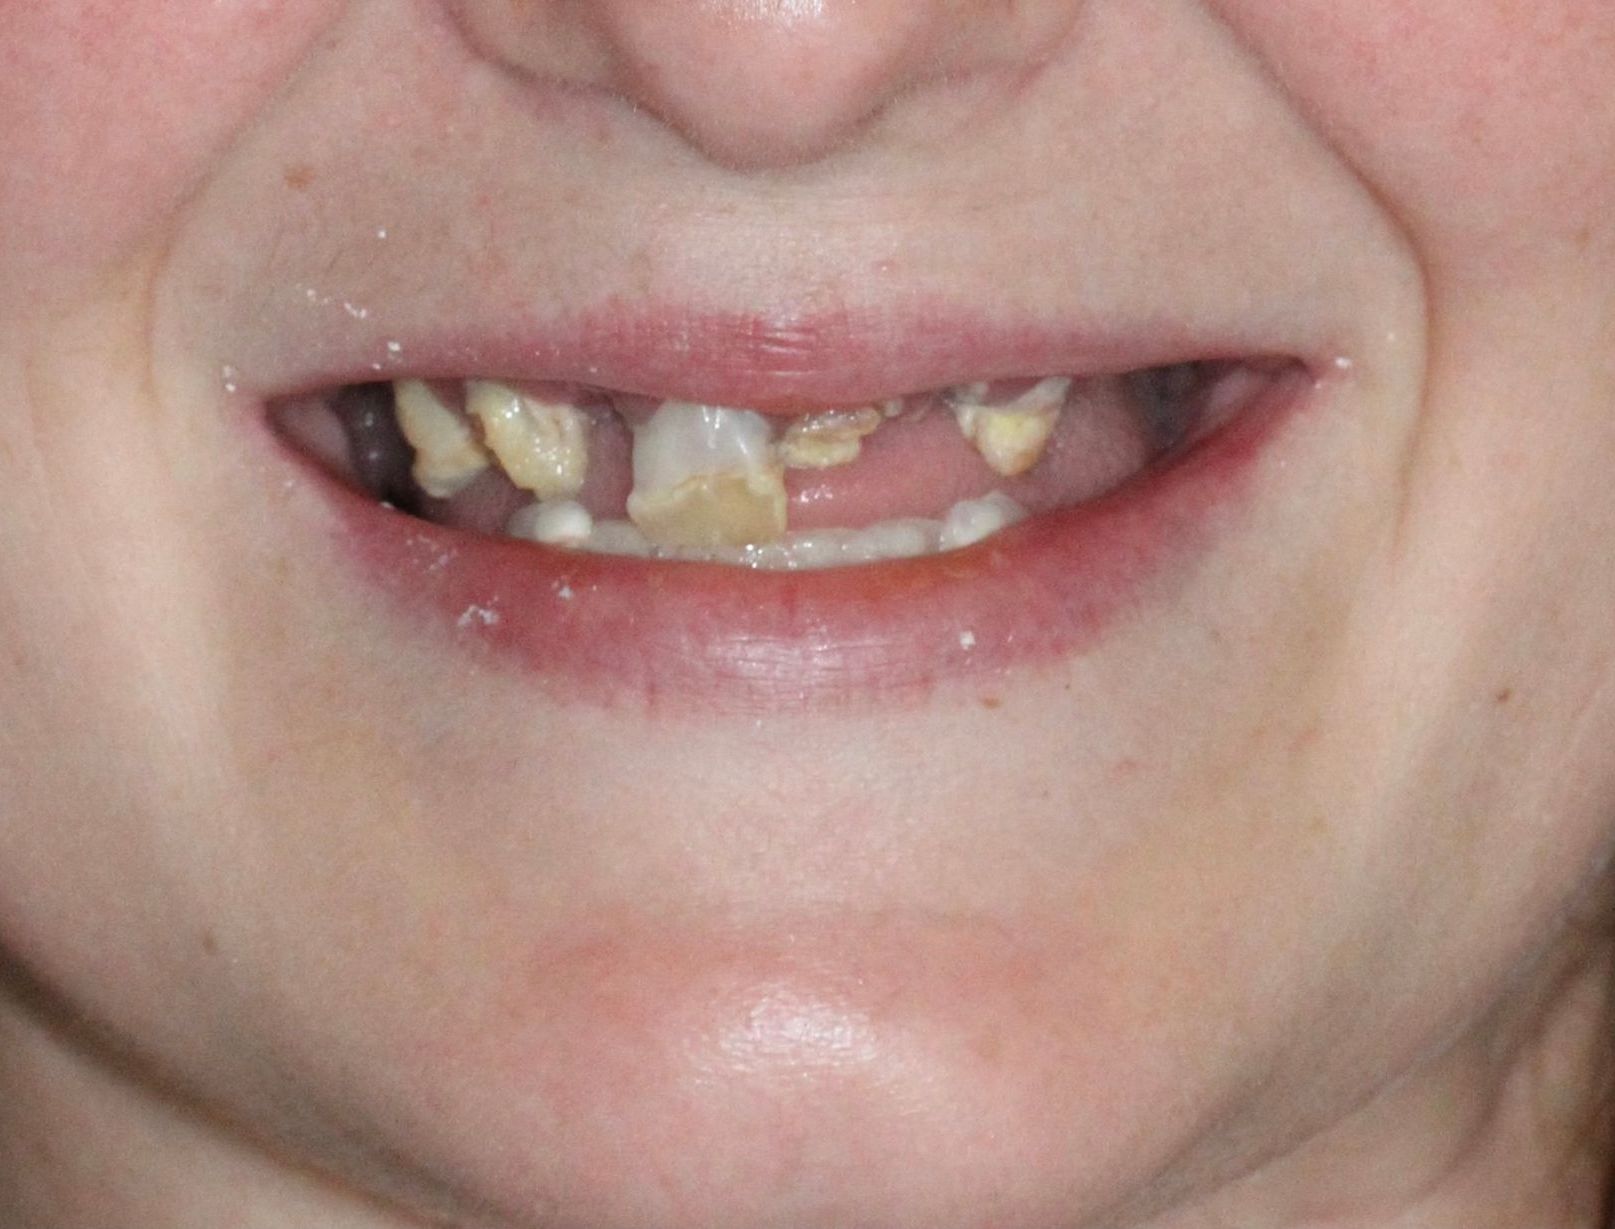 A close up of a woman 's mouth with missing teeth.